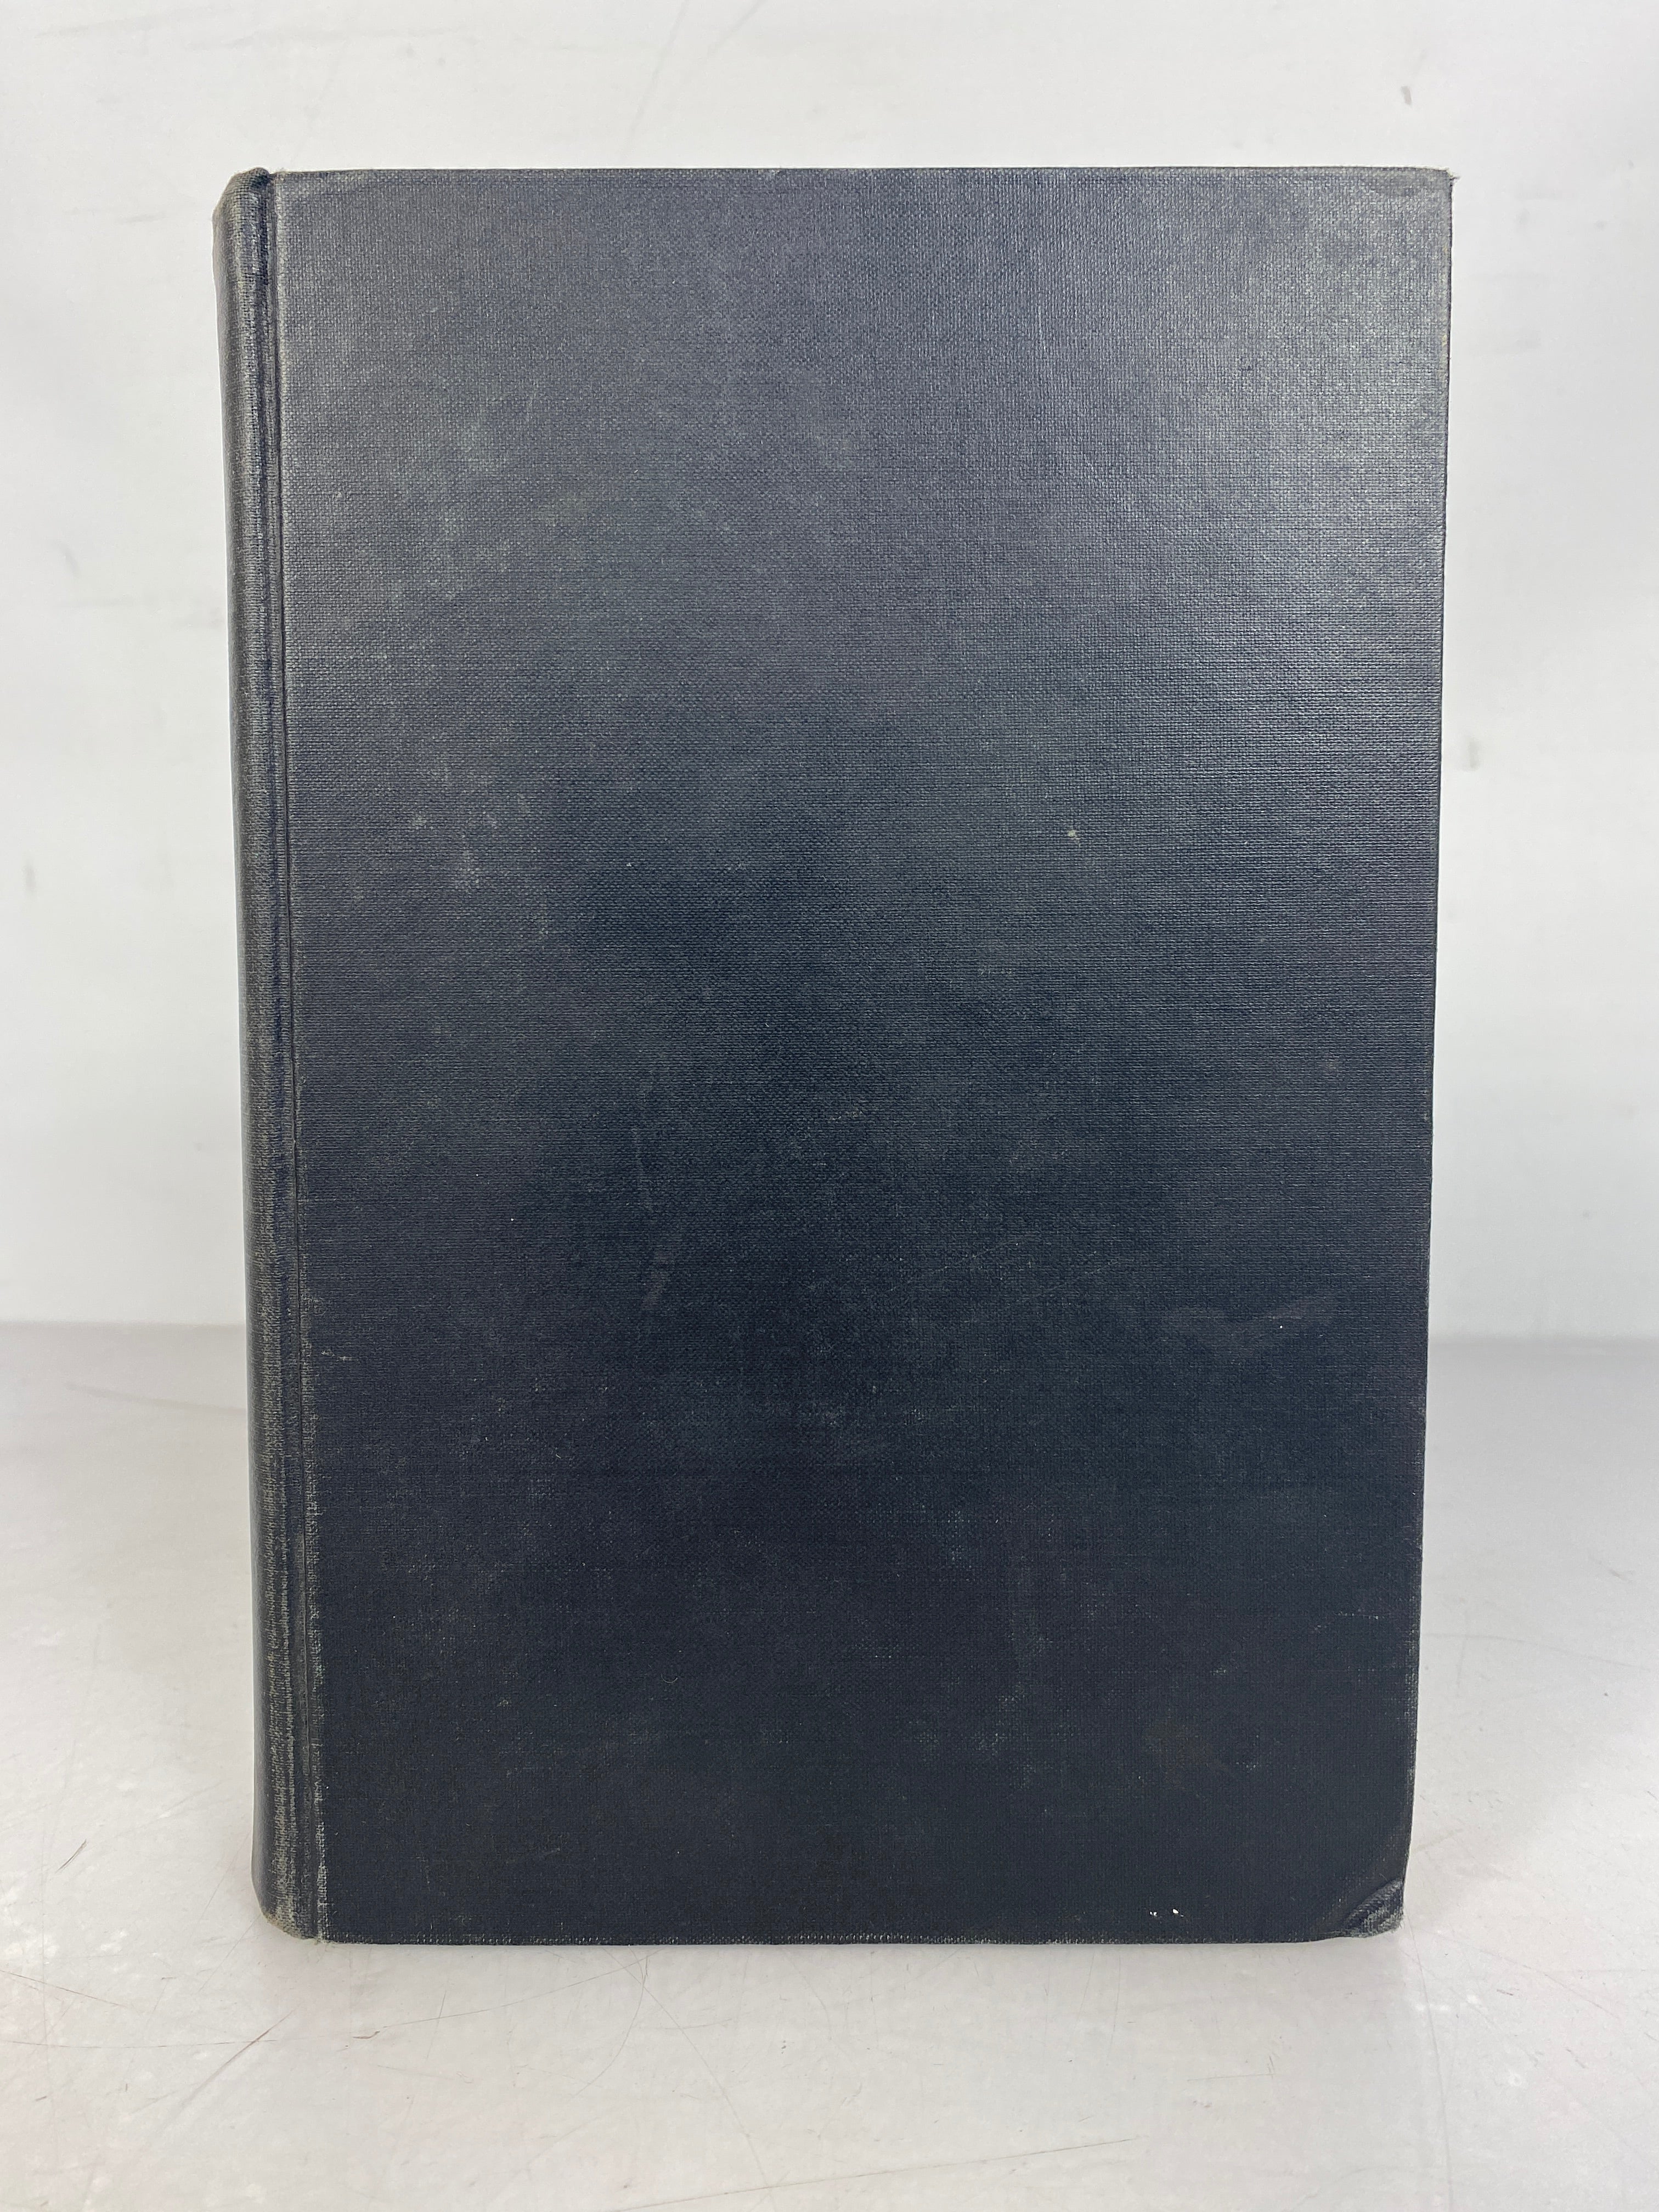 Integration and Competition in the Petroleum Industry by de Chazeau and Kahn 1959 HC